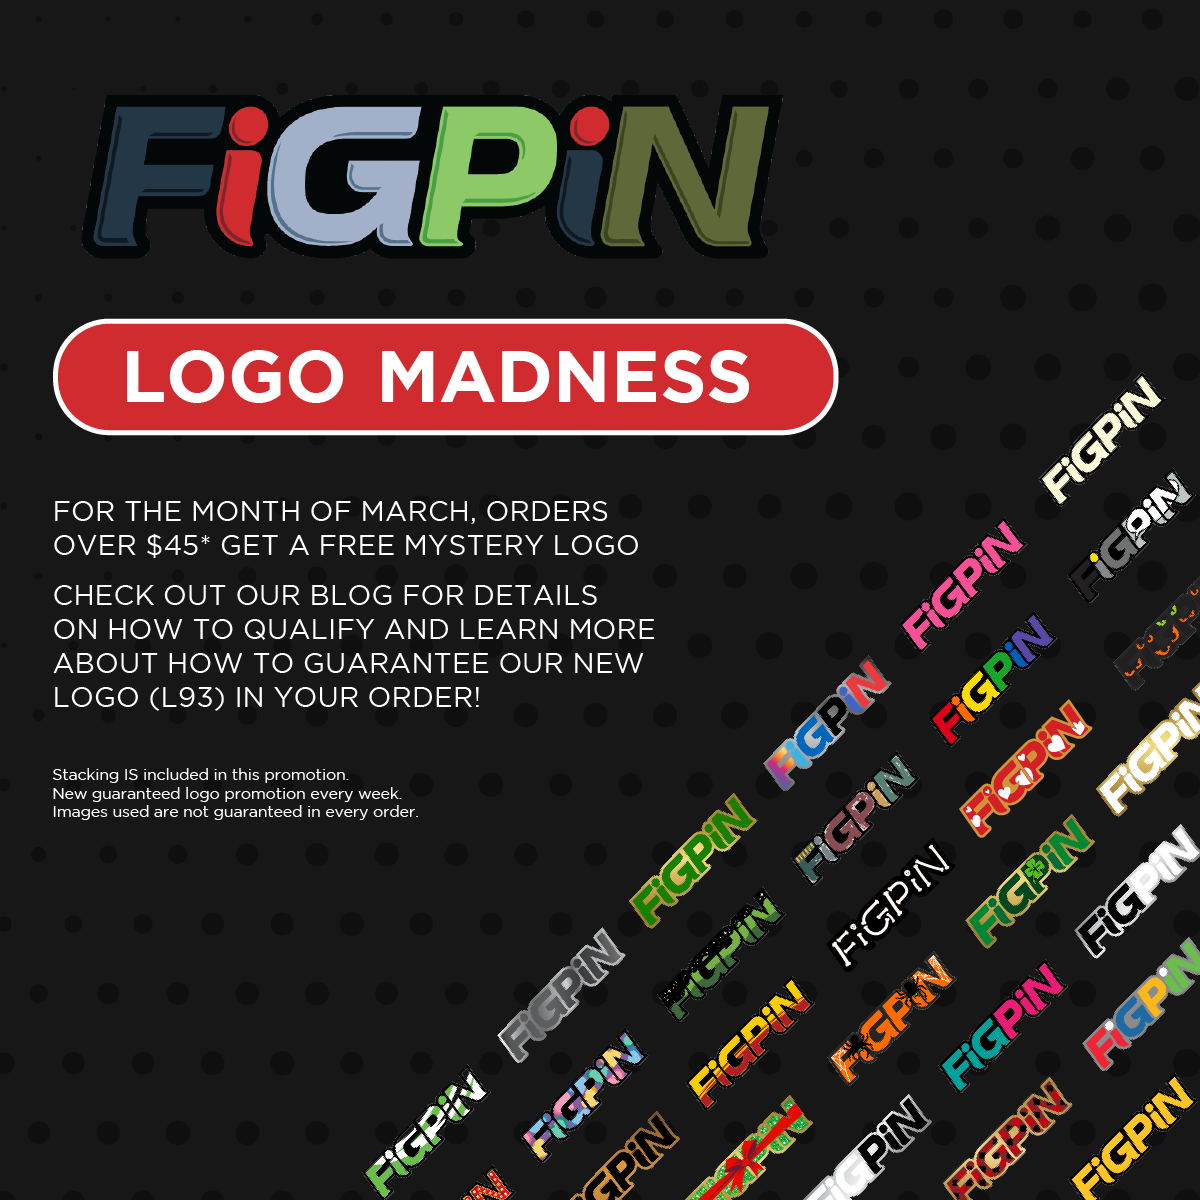 Week 02 of FiGPiN Logo Madness featuring L93